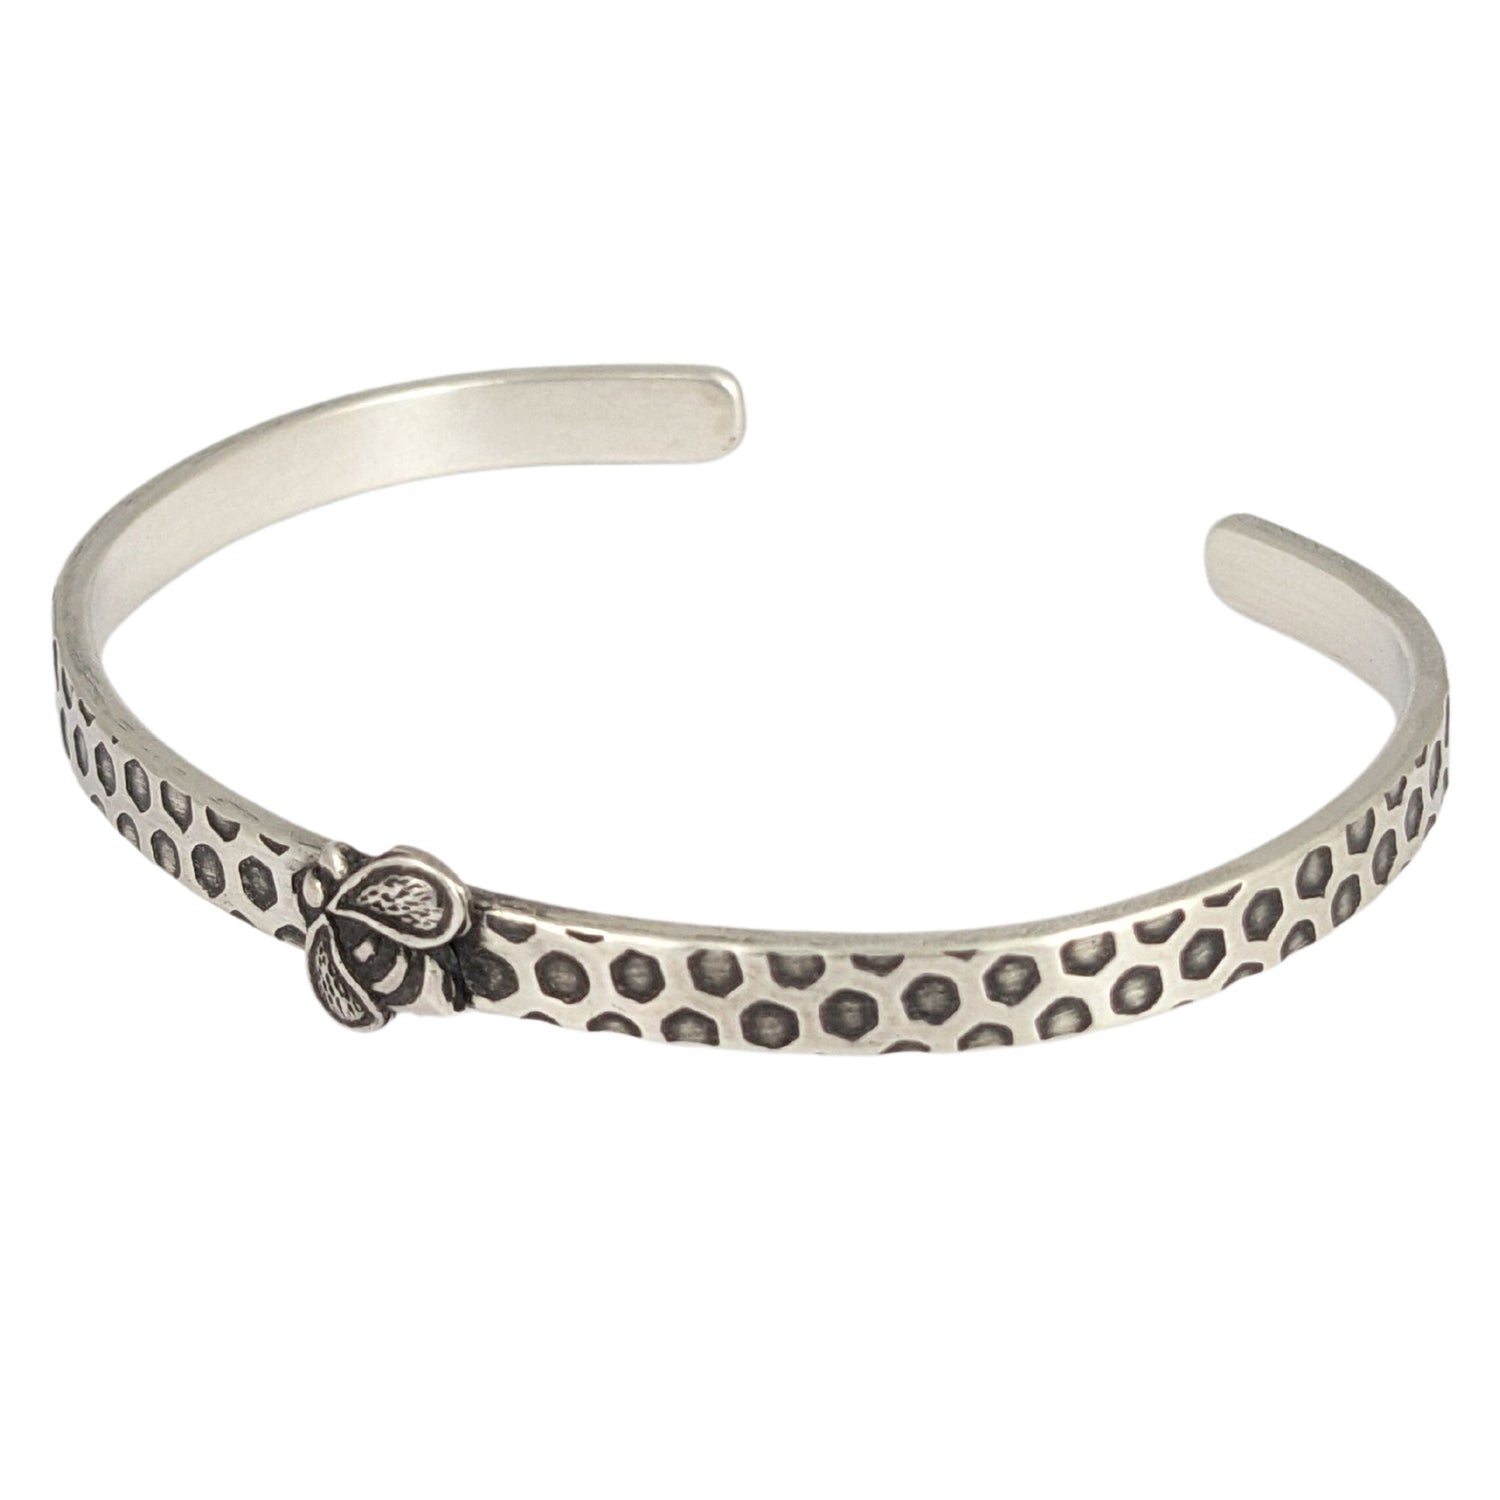 Narrow sterling silver cuff bracelet with a hexagon honeycomb pattern. A the center of the cuff there's a sterling silver honeybee.